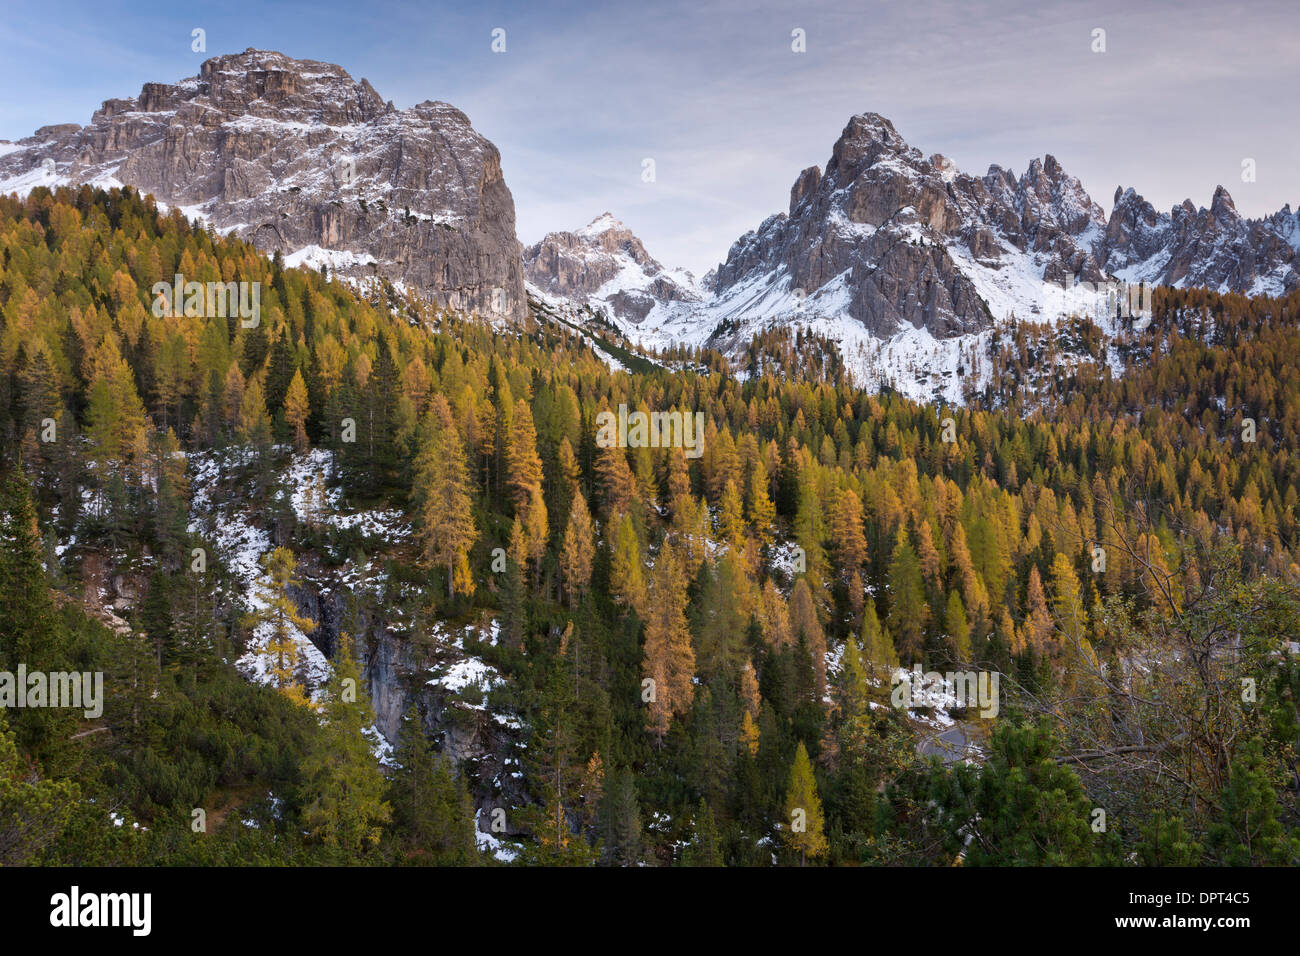 The Cadini di Misurina in autumn after early snow, Dolomites, north Italy. Stock Photo